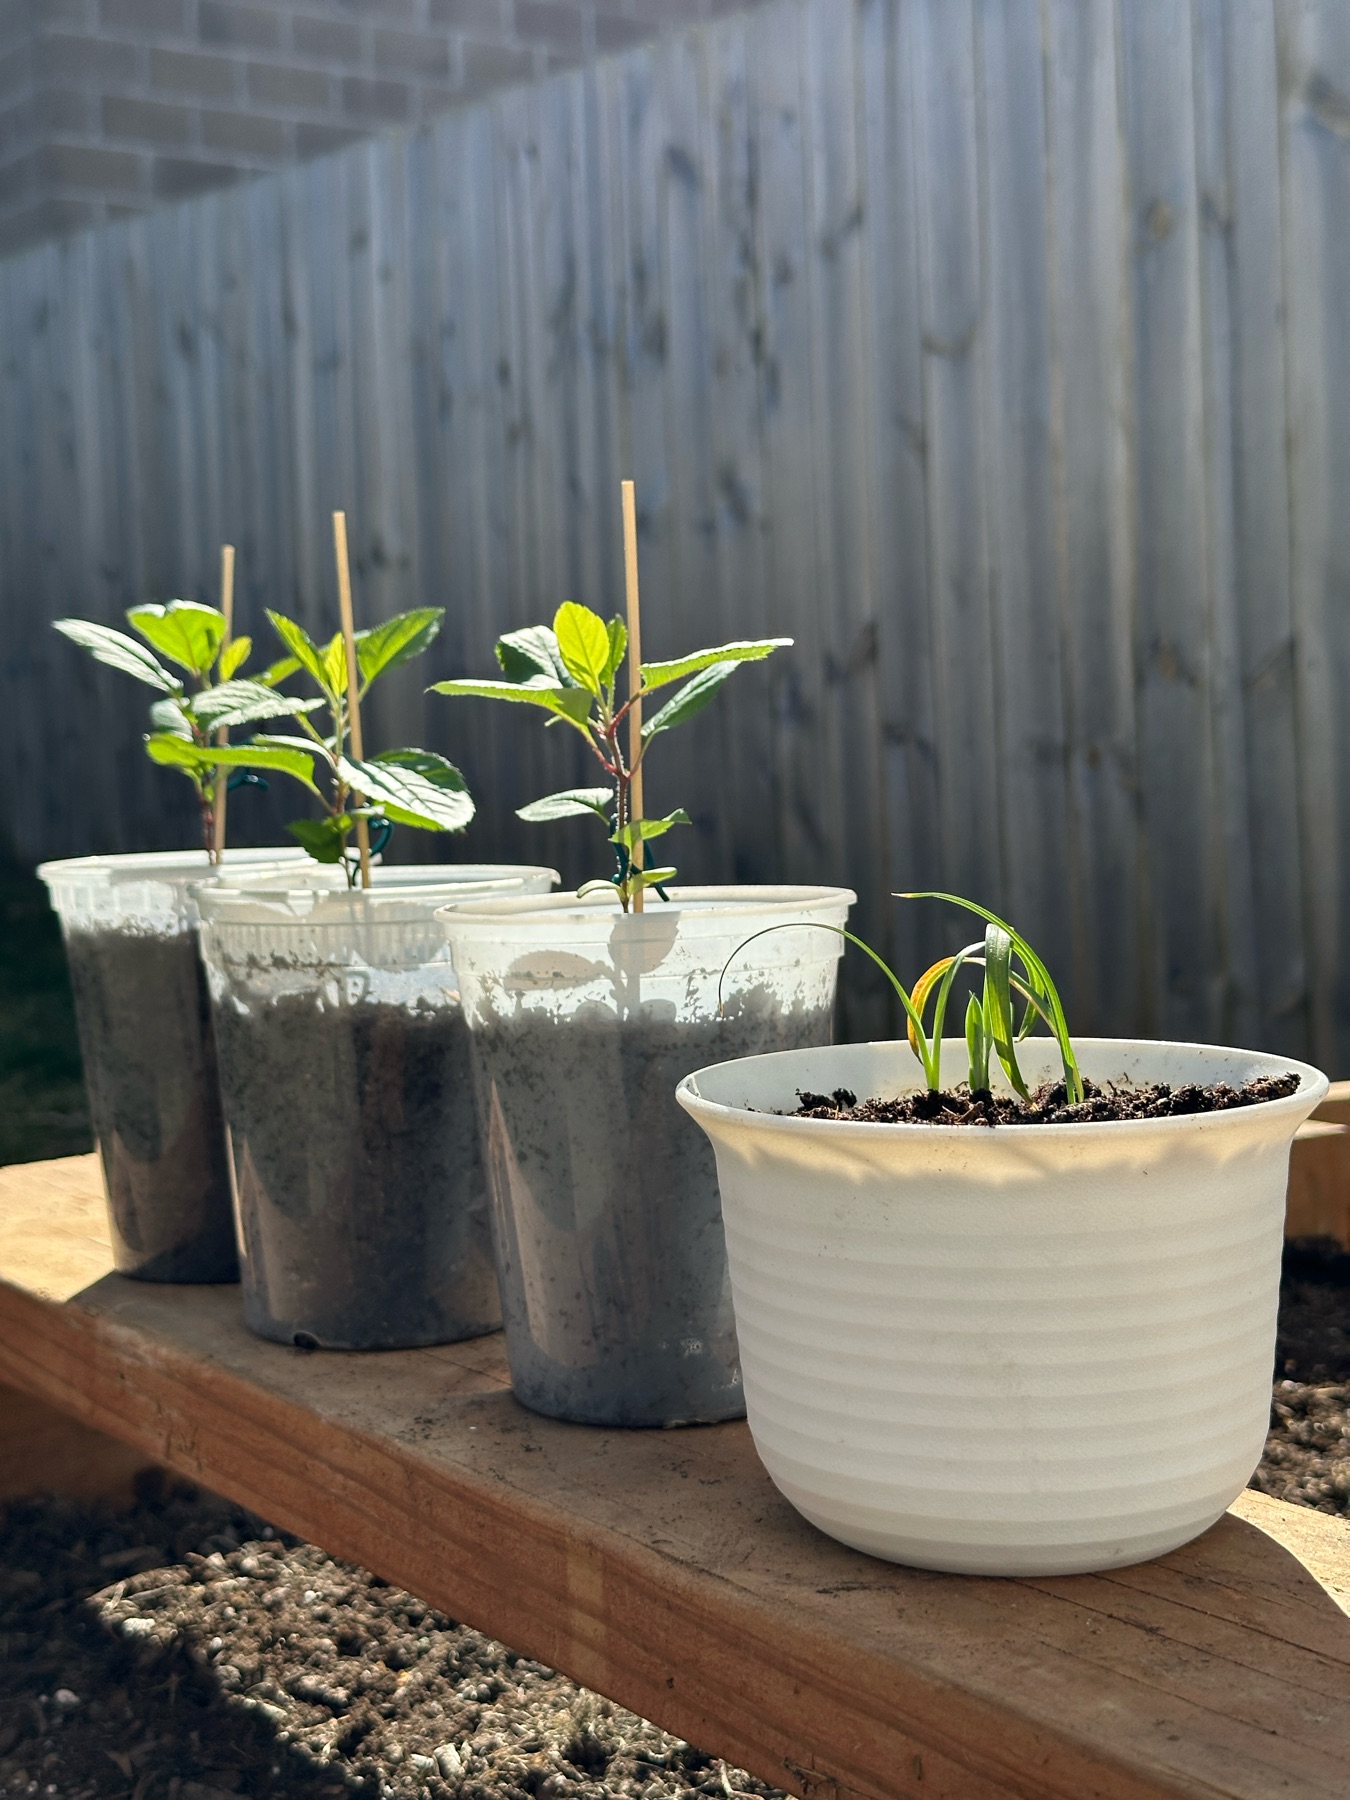 Three small apple tree seedlings in pots, with one set of potted lilies in front